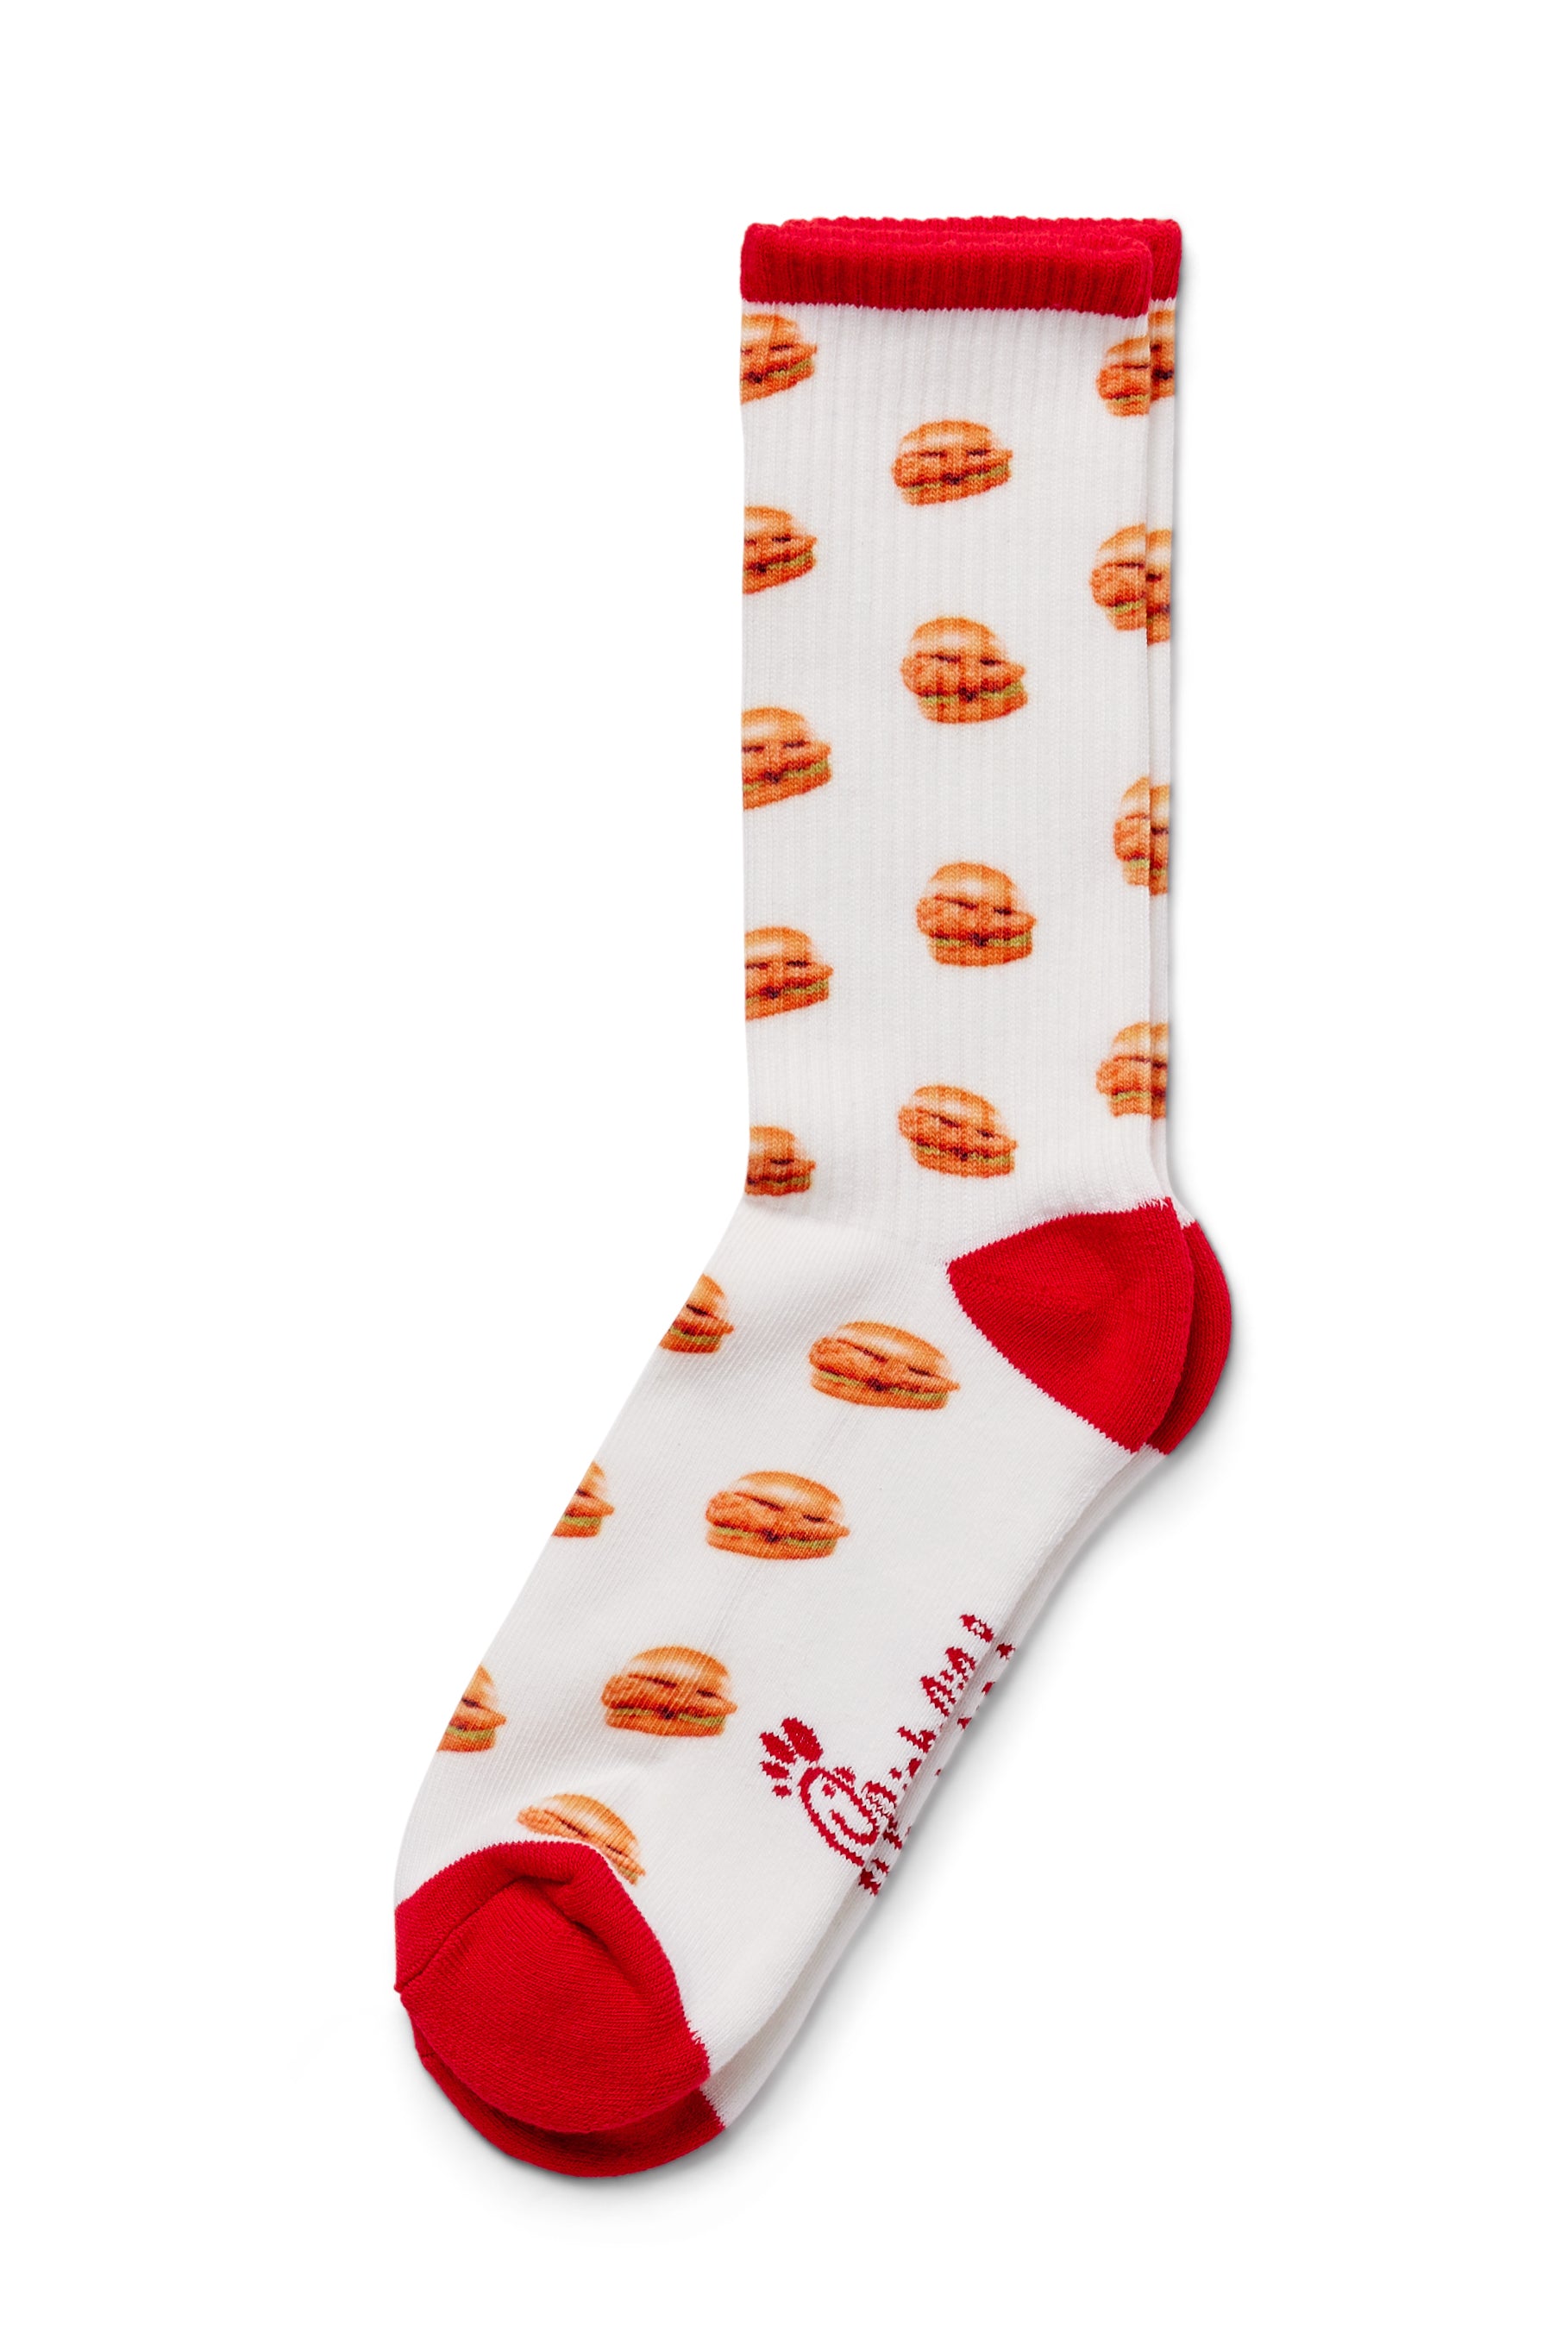 Original Chick-fil-A® Chicken Sandwich Socks Pair with chicken sandwich pattern and red toe and heel detailing